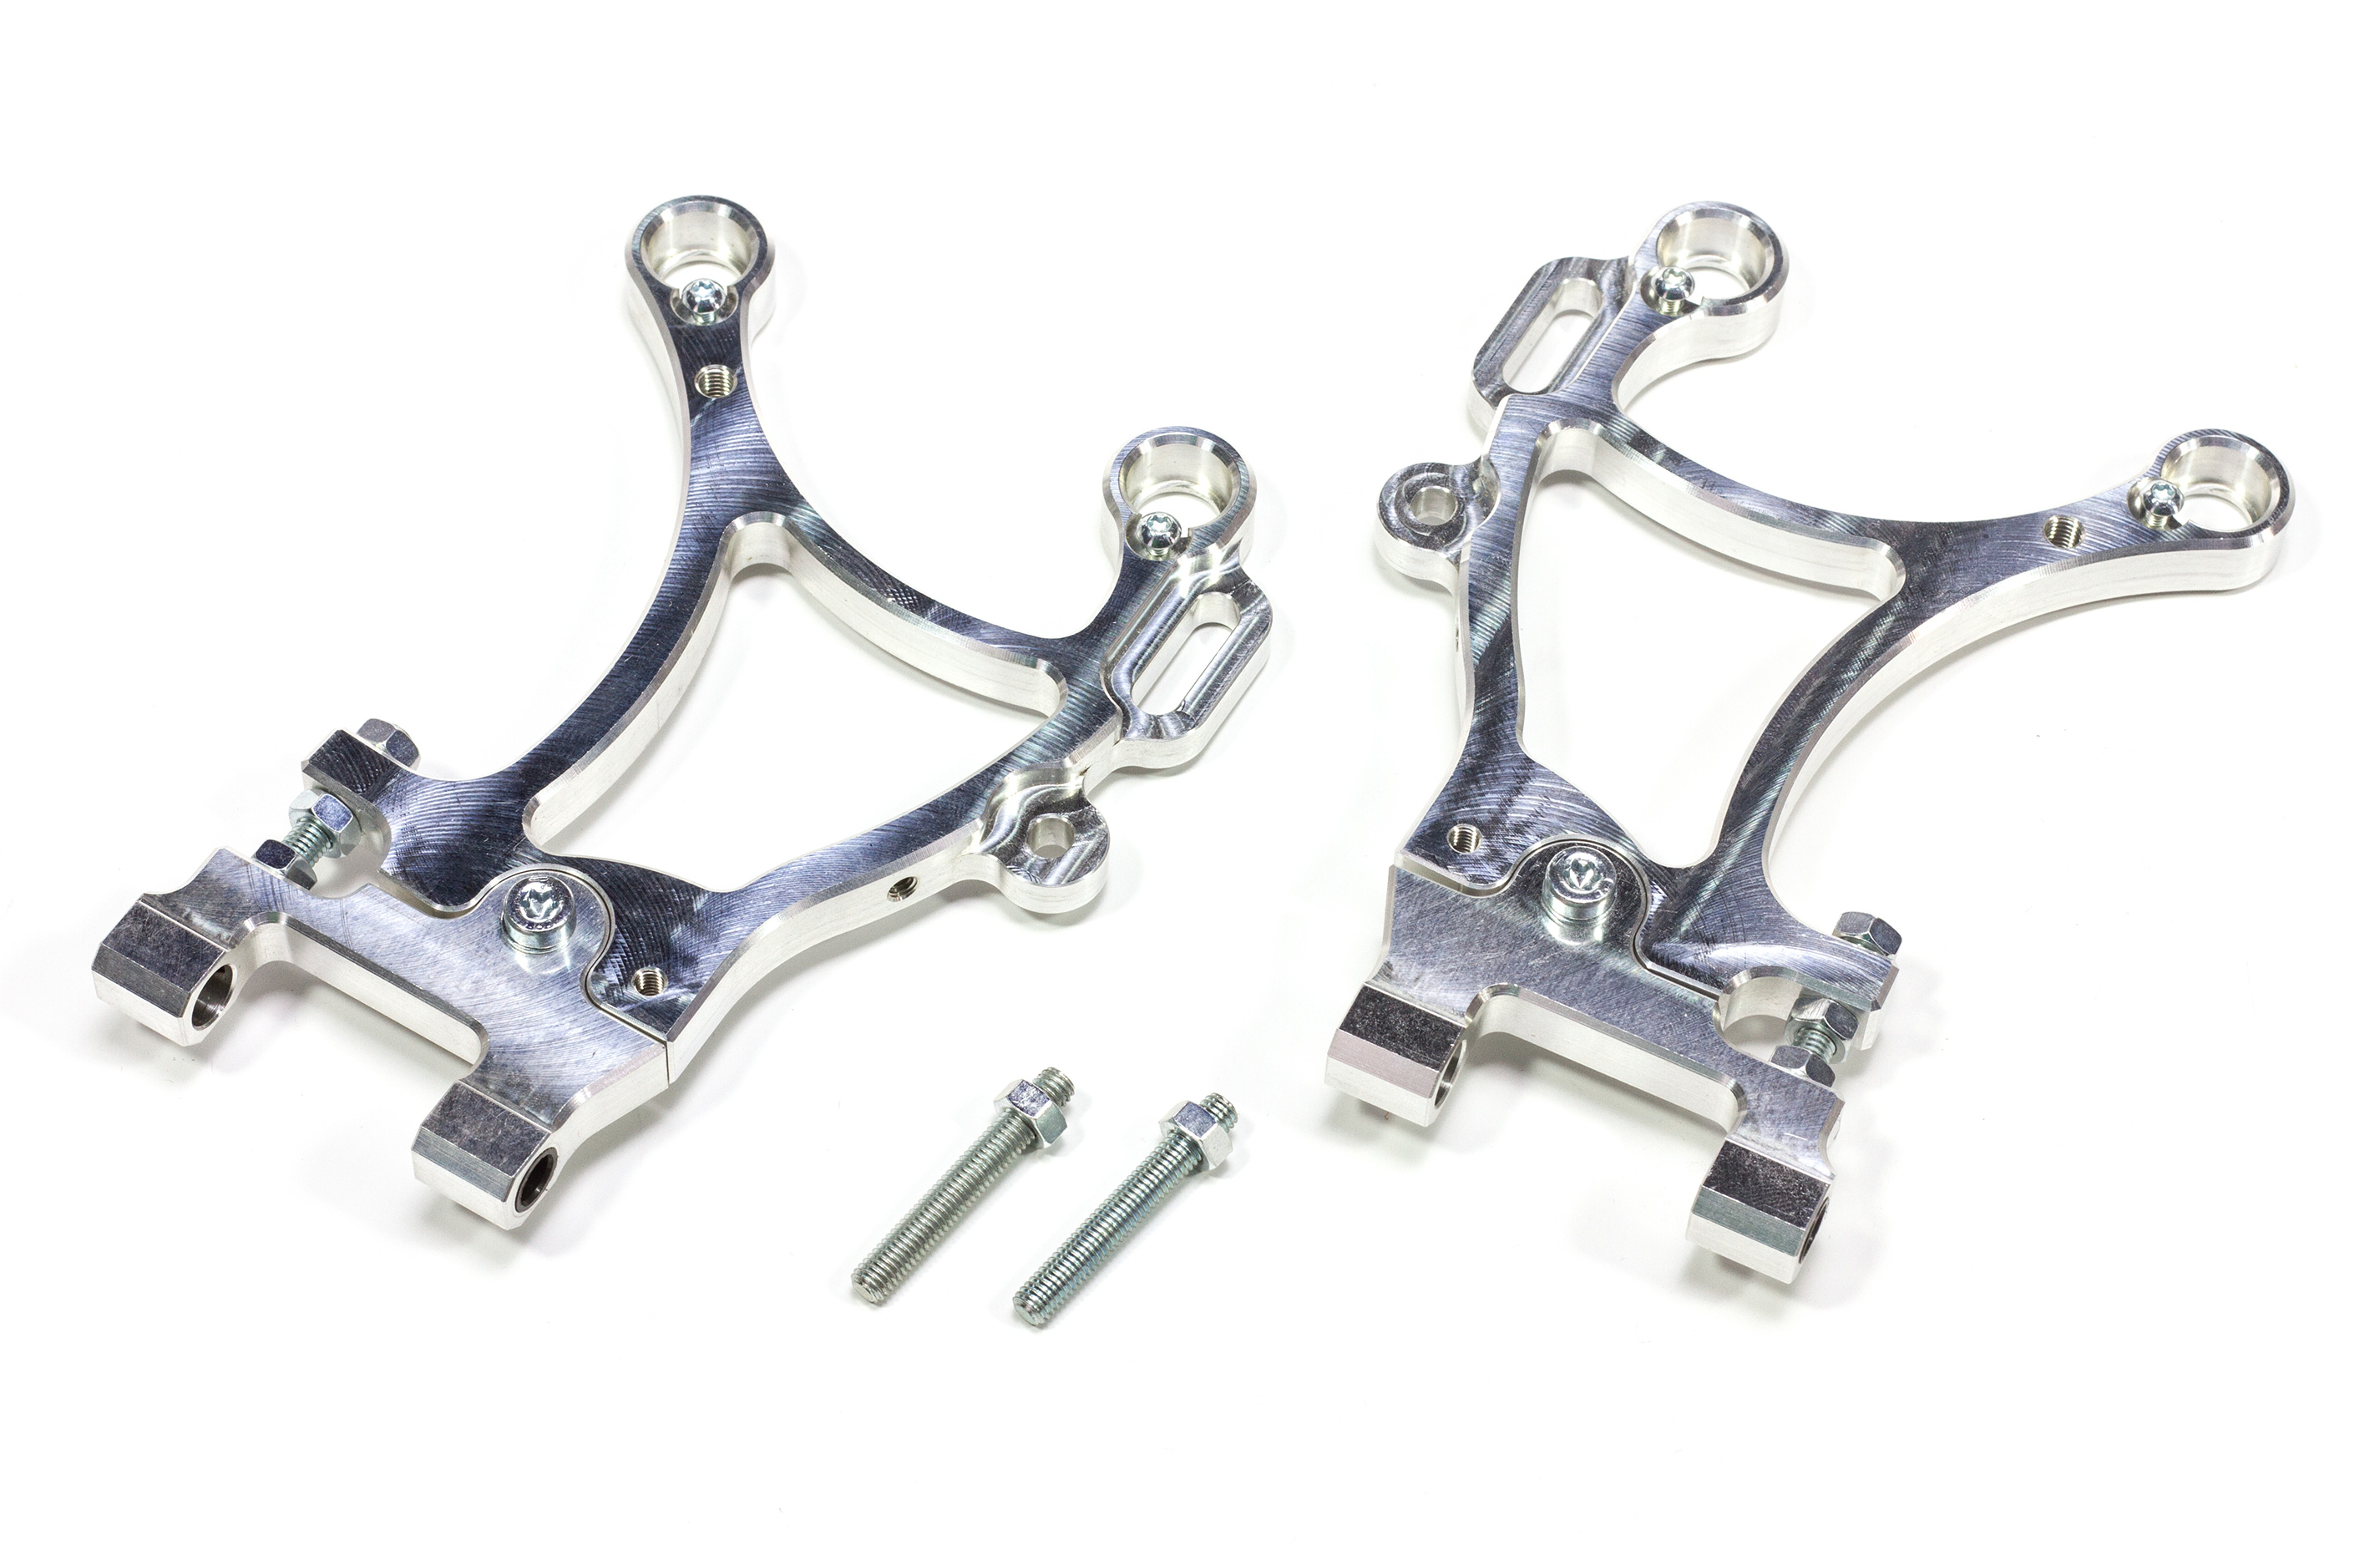 y0315 Elcon Aluminum a-arms, rear lower, for FG Evo and Sportsline, truck width, pair